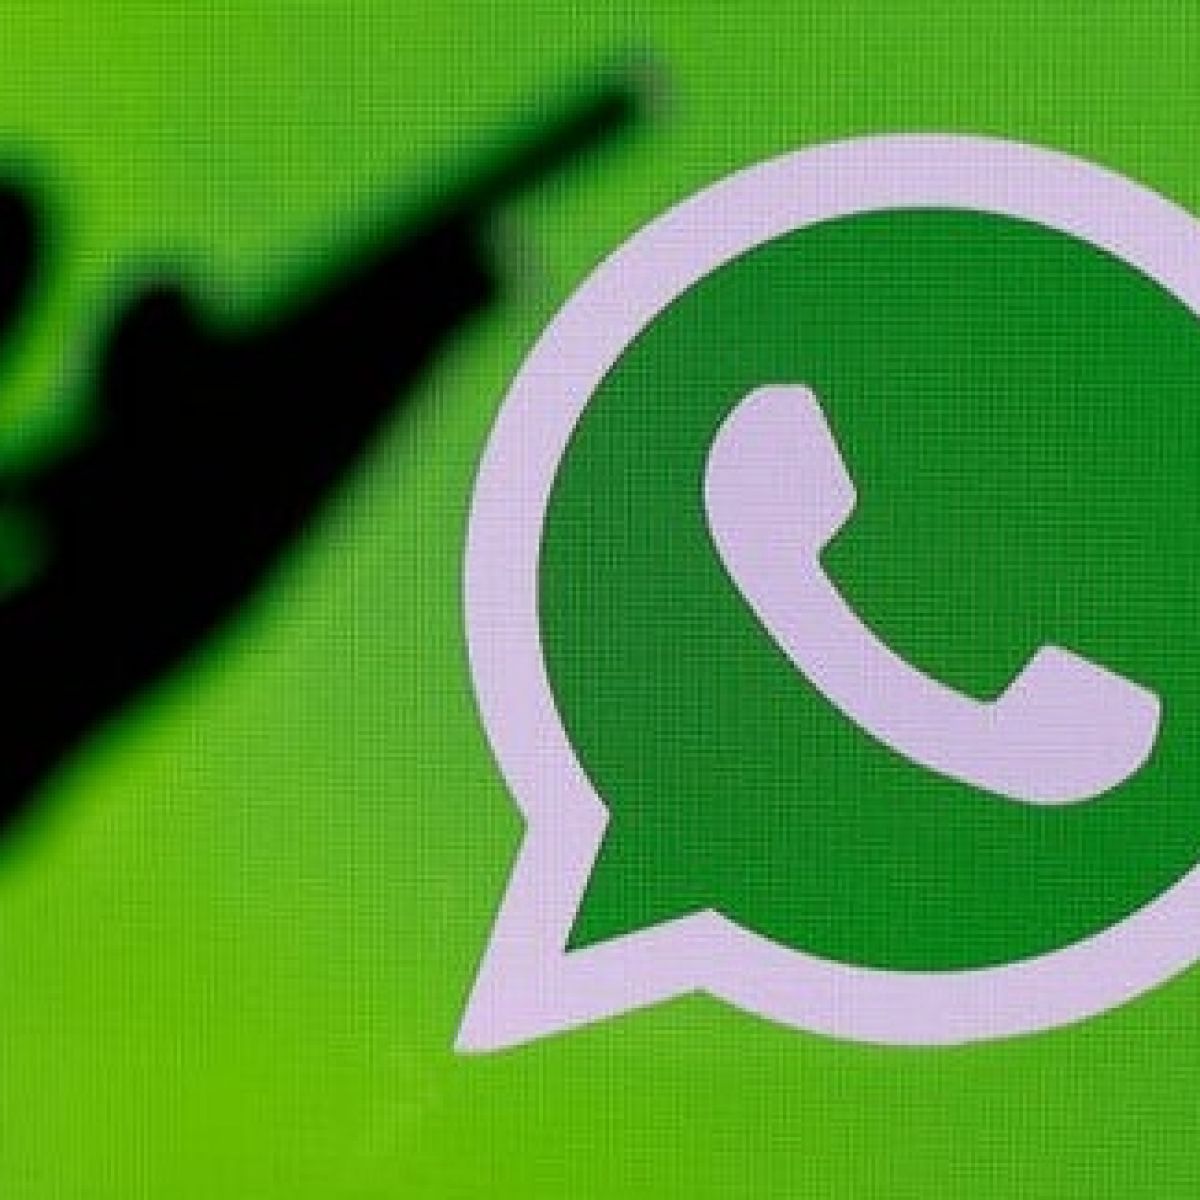 WhatsApp finds voice calls used to inject spyware on phones - 